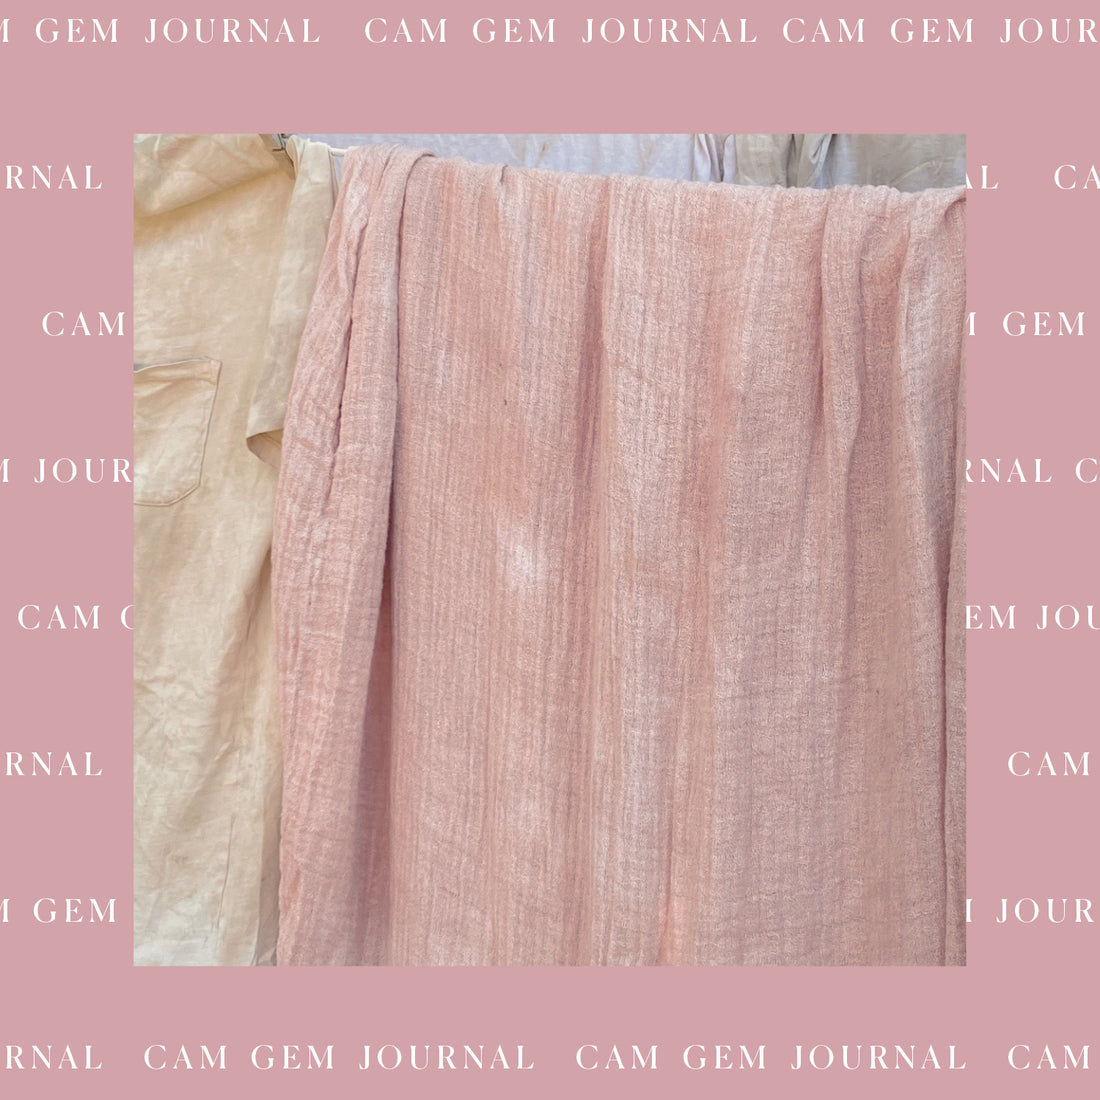 CAM Gem Journal: Clothing Up-cycling